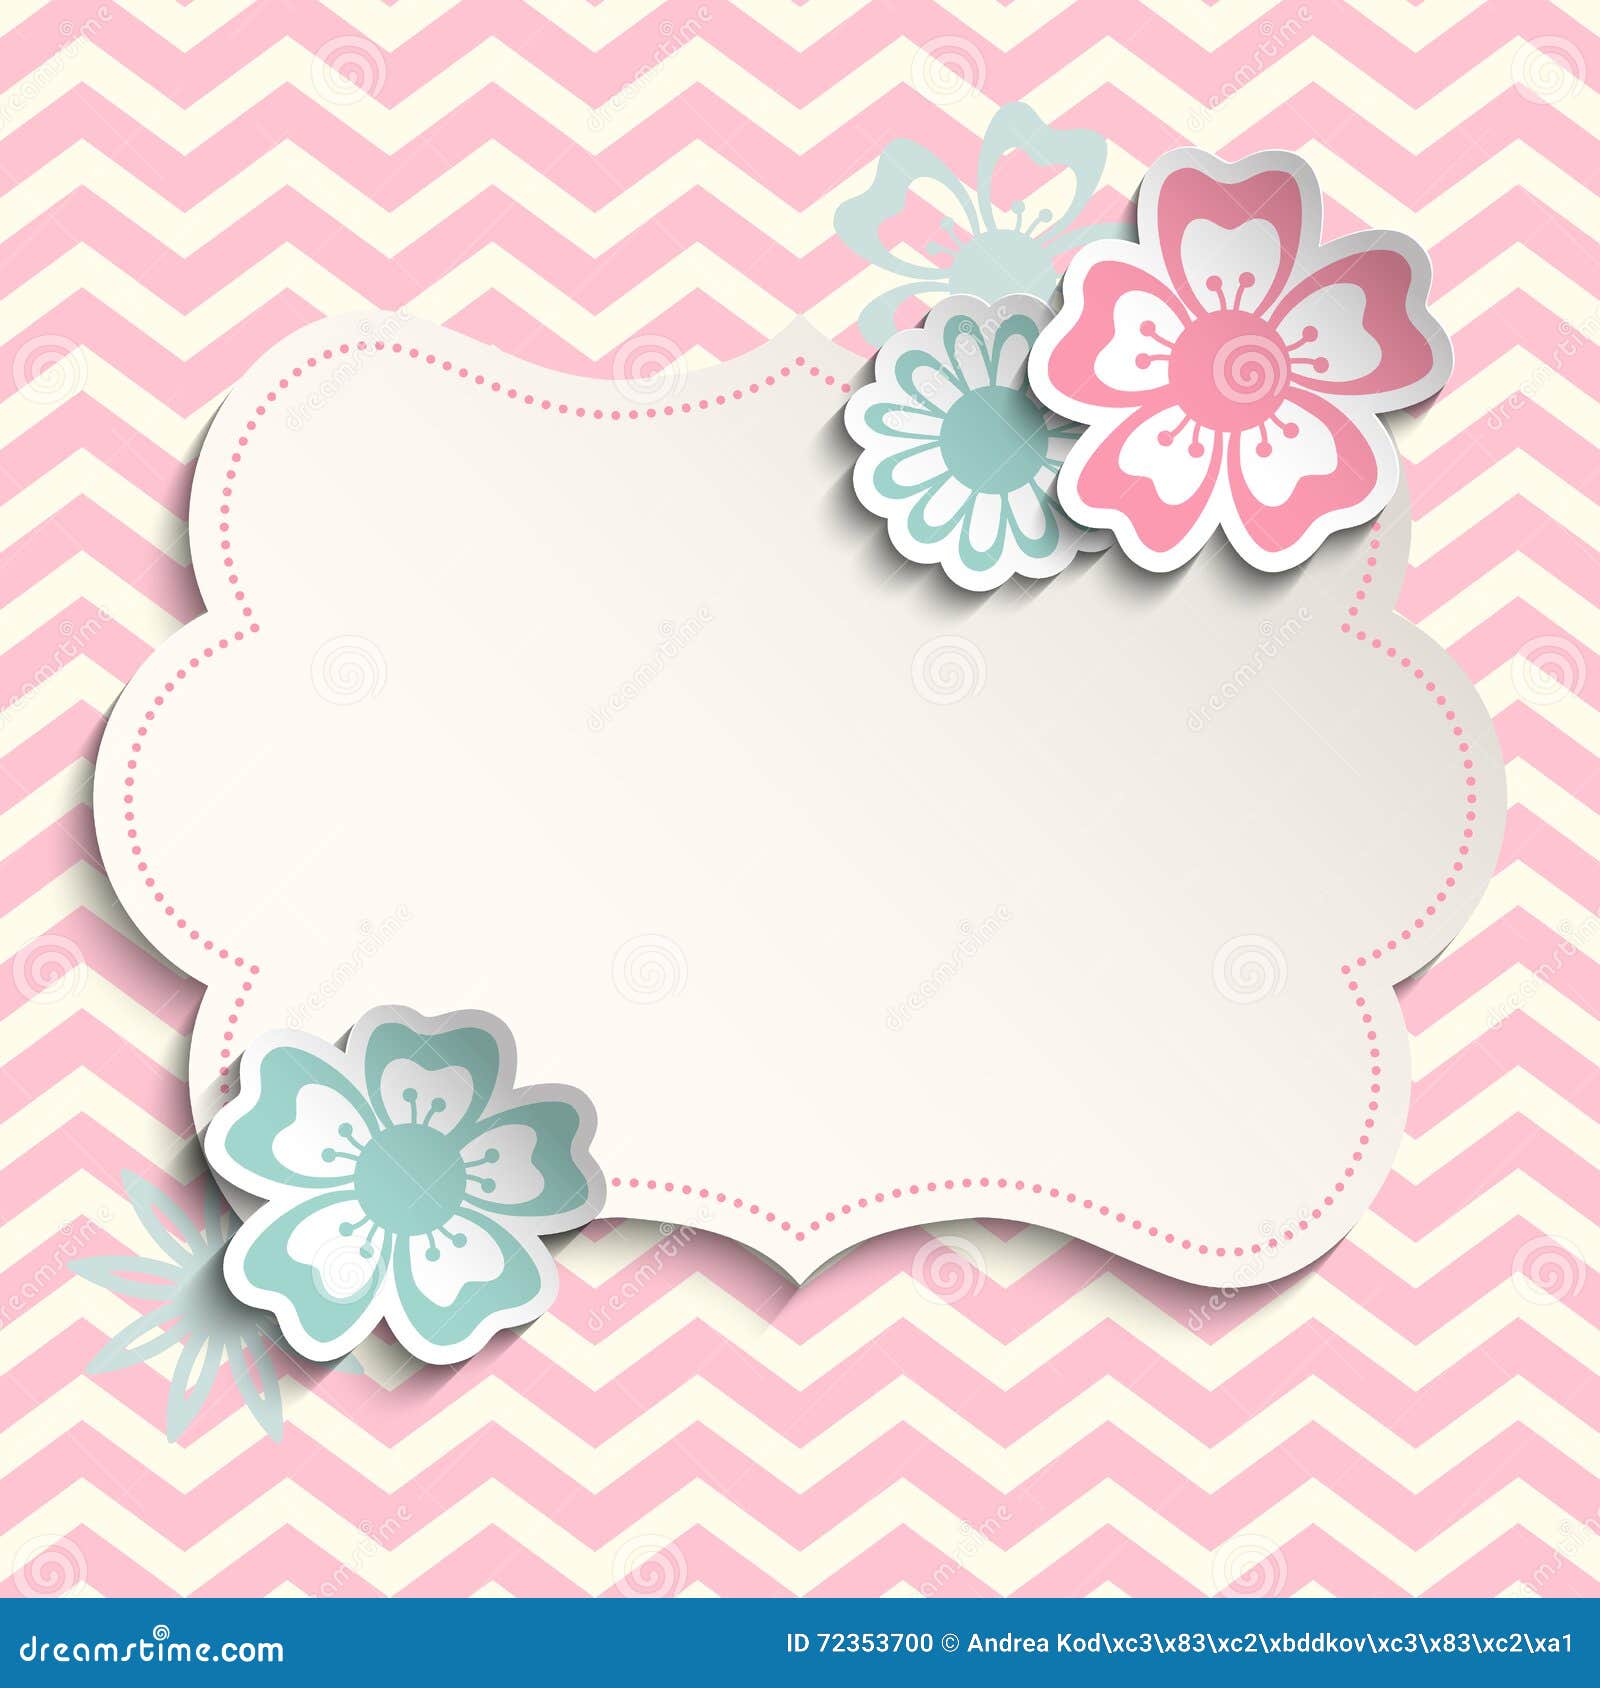 shabby chic template with flowers, 